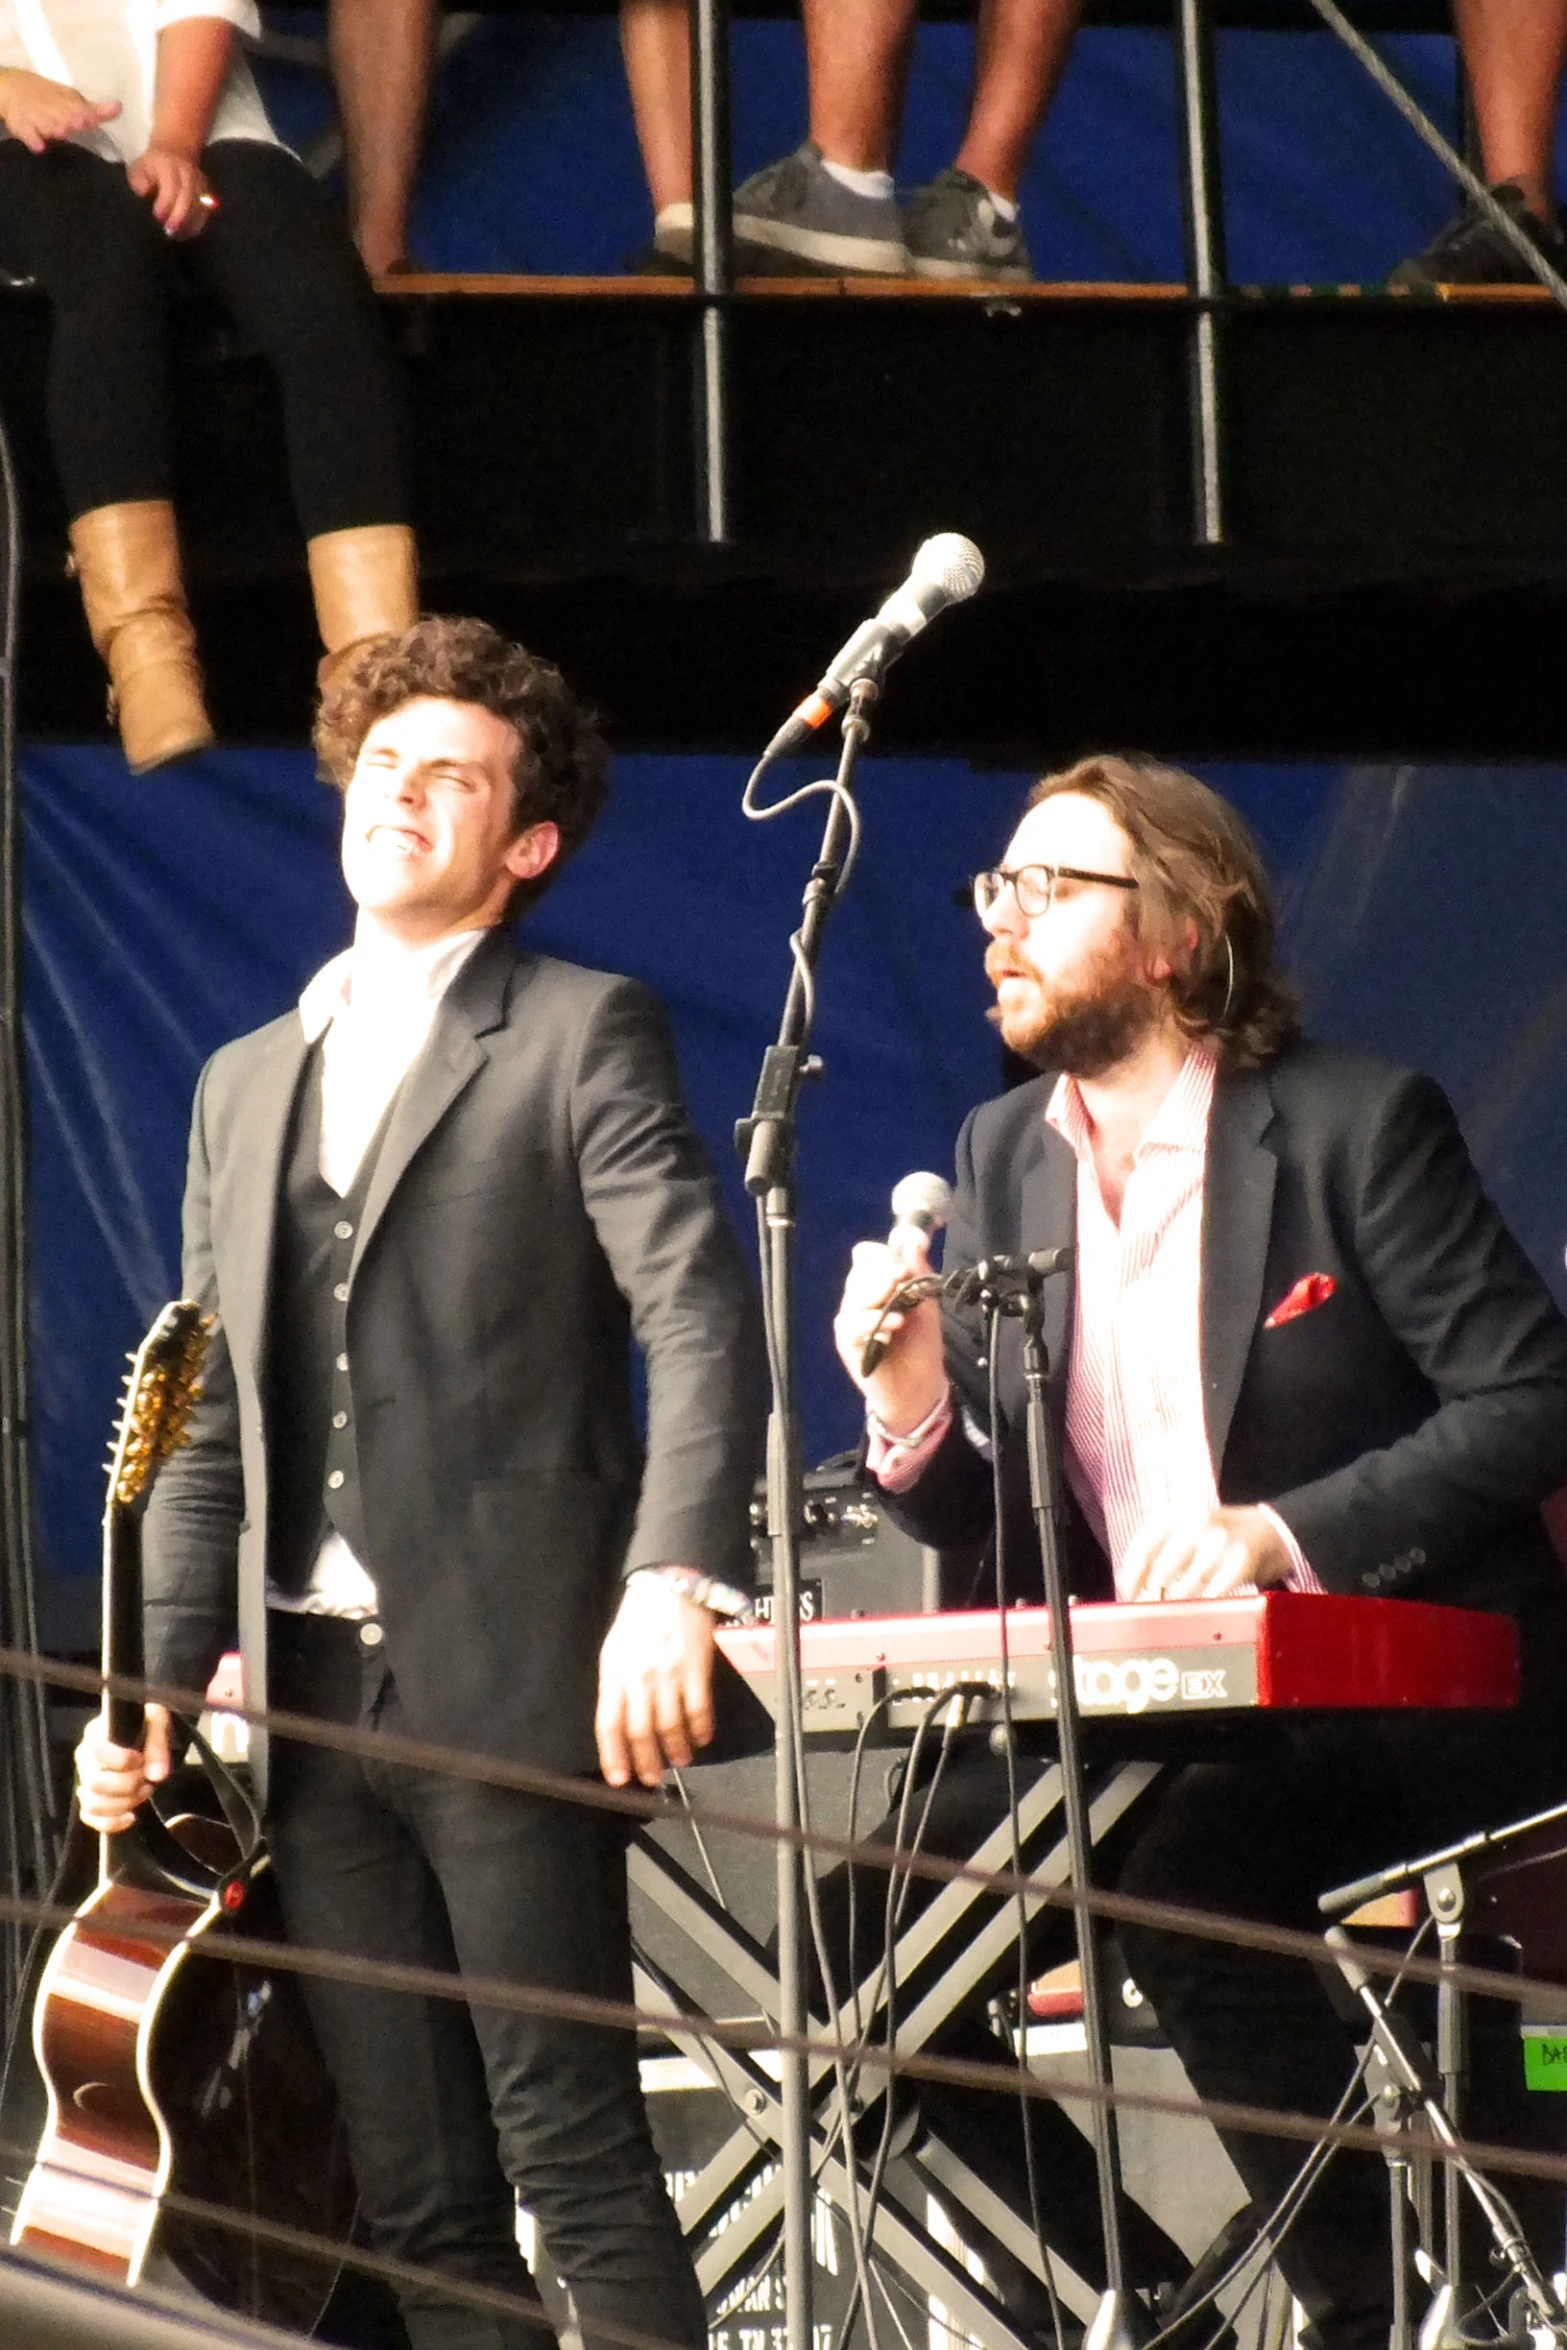 two men with glasses sing into microphones while standing behind a speaker